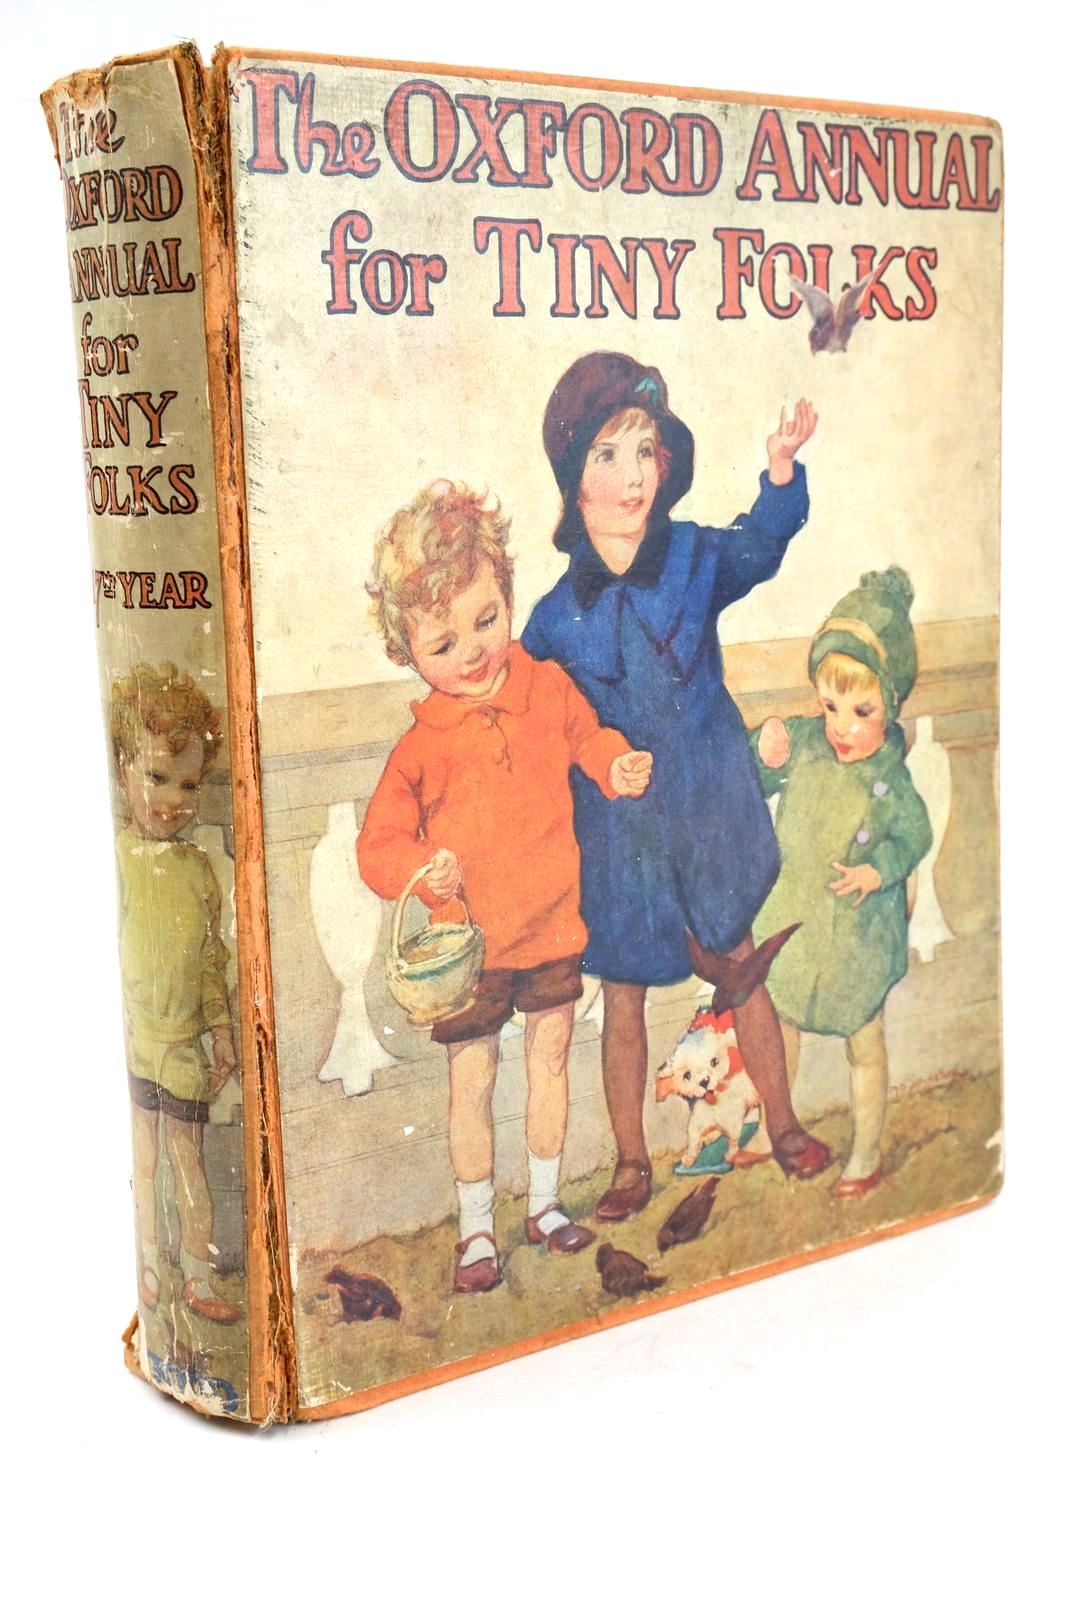 Photo of THE OXFORD ANNUAL FOR TINY FOLKS 17TH YEAR written by Strang, Mrs. Herbert et al, illustrated by Browne, Enid Warne Govey, Lilian A. Macgregor, Angusine Harrison, Florence Rees, E. Dorothy et al., published by Oxford University Press, Humphrey Milford (STOCK CODE: 1325094)  for sale by Stella & Rose's Books